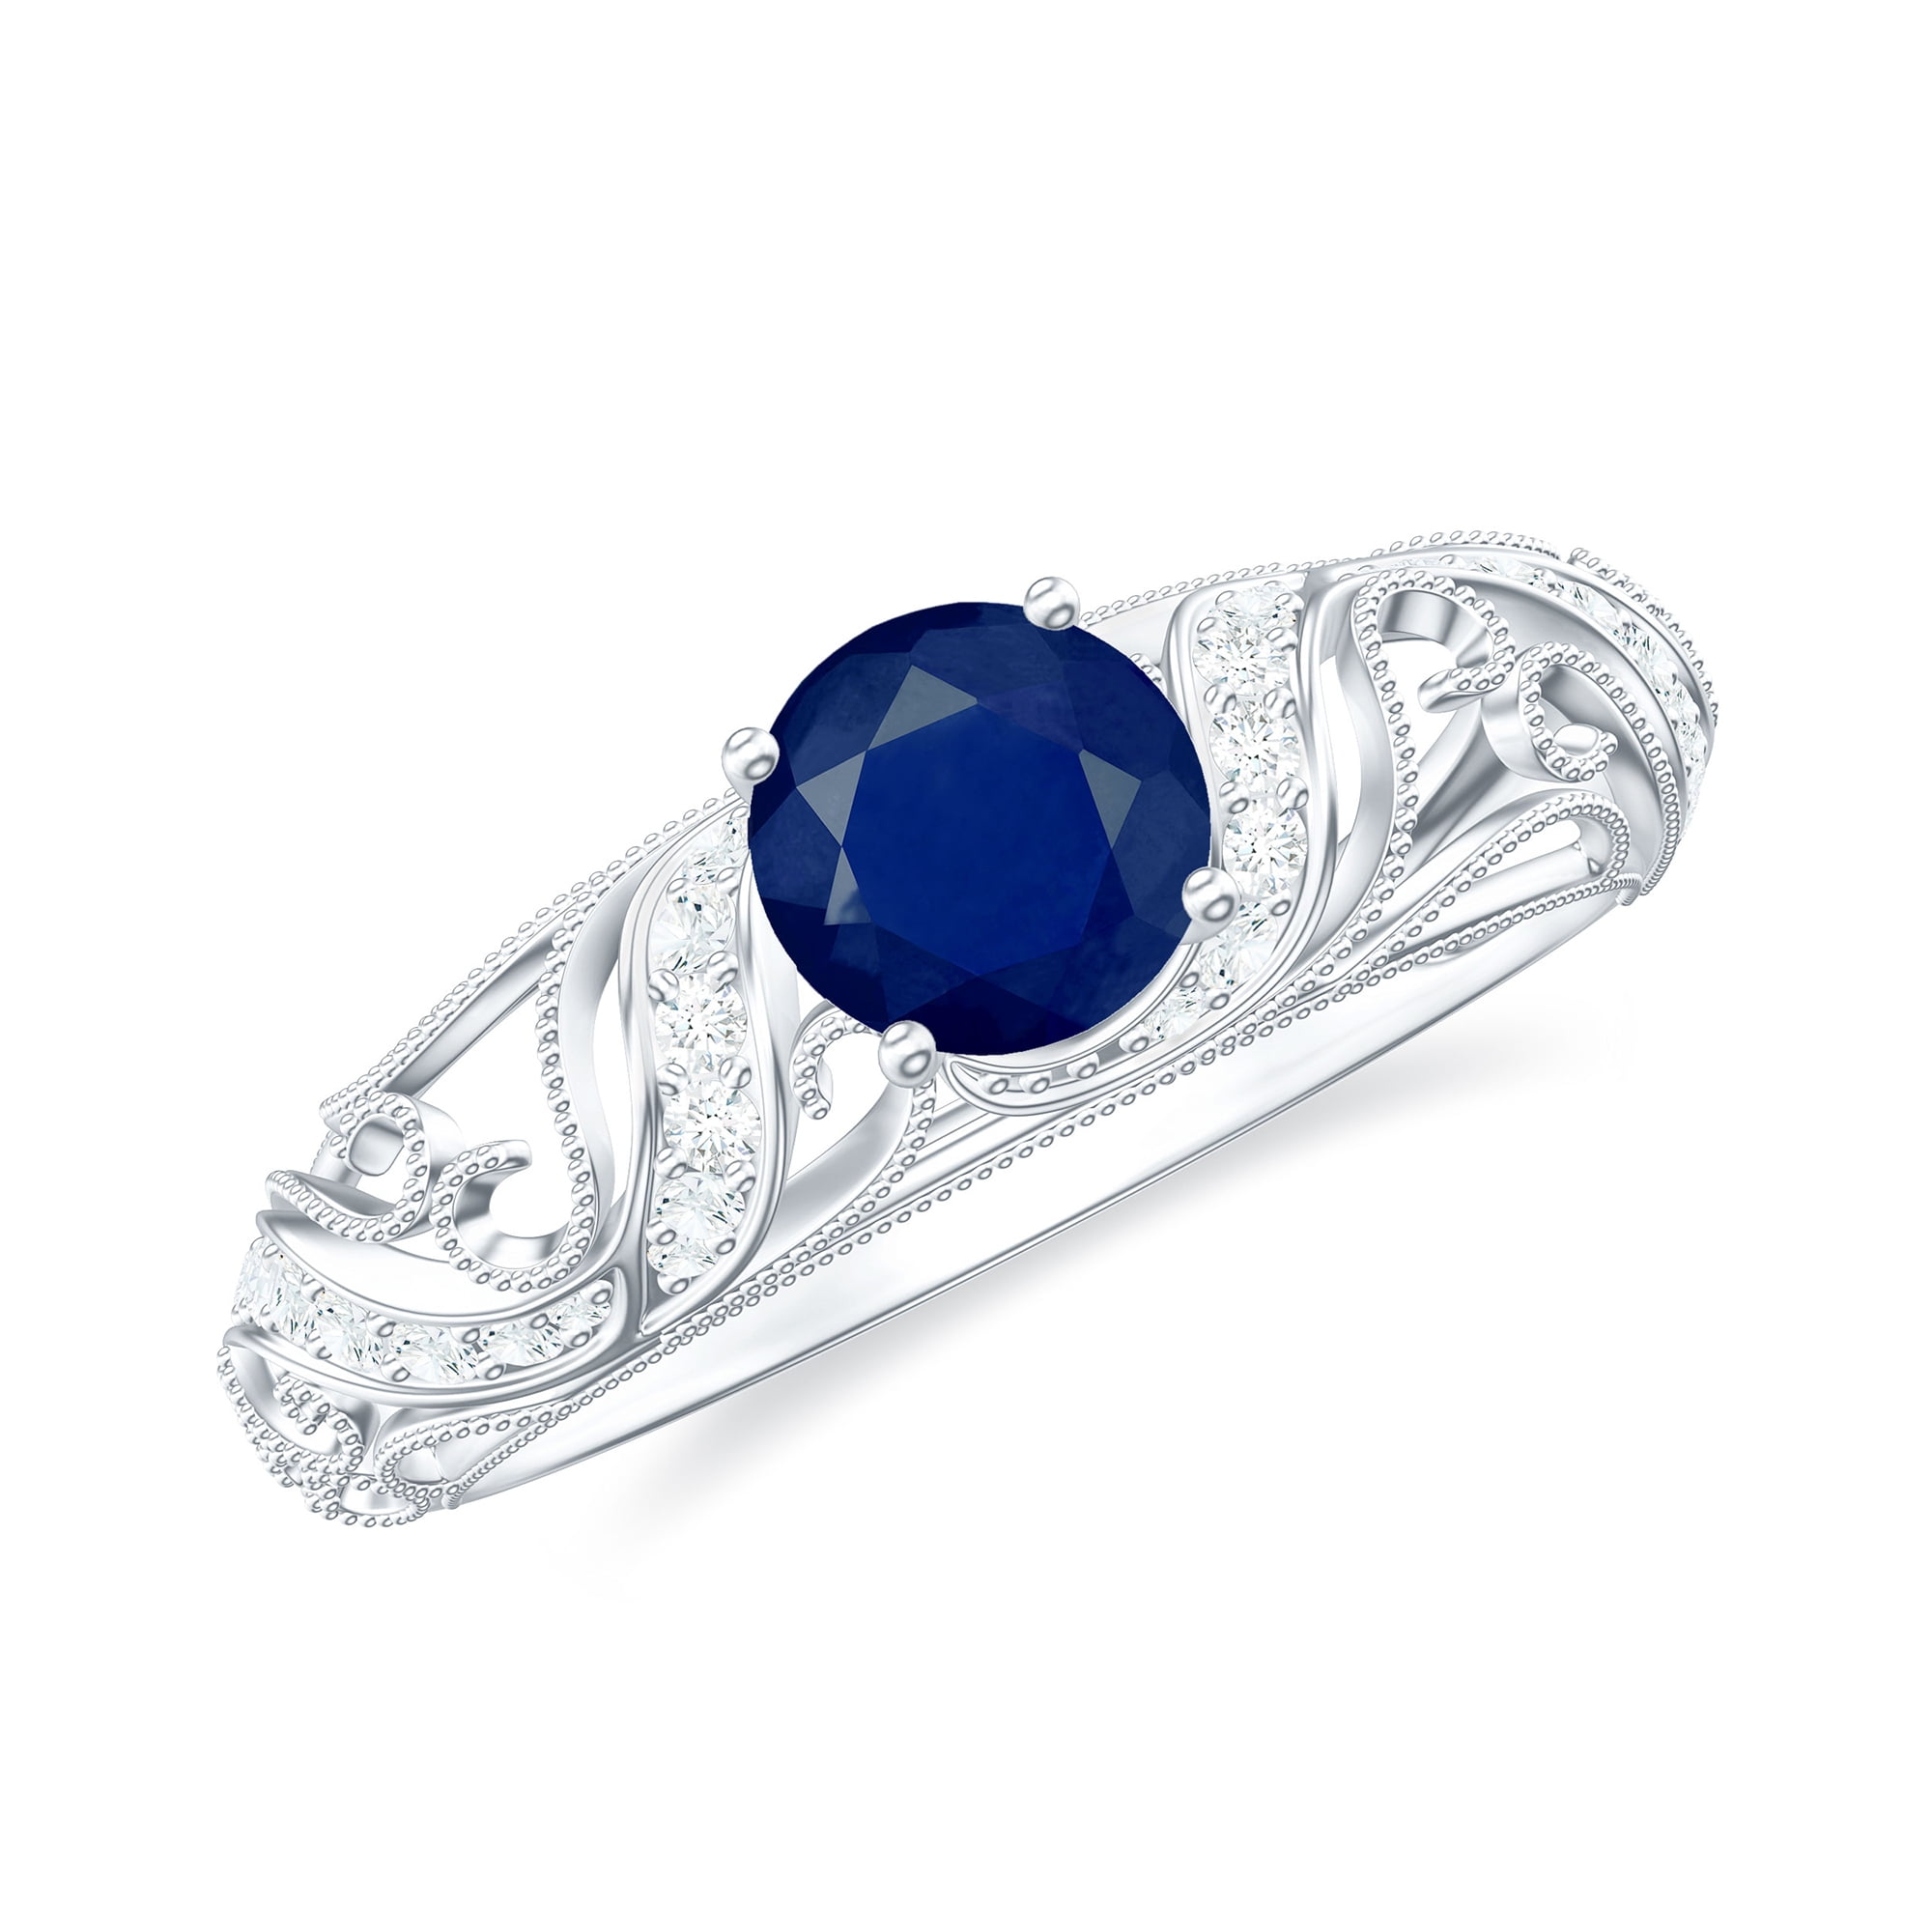 Stylish Round cut Genuine Blue Sapphire Ring with White Sapphire - 12519A